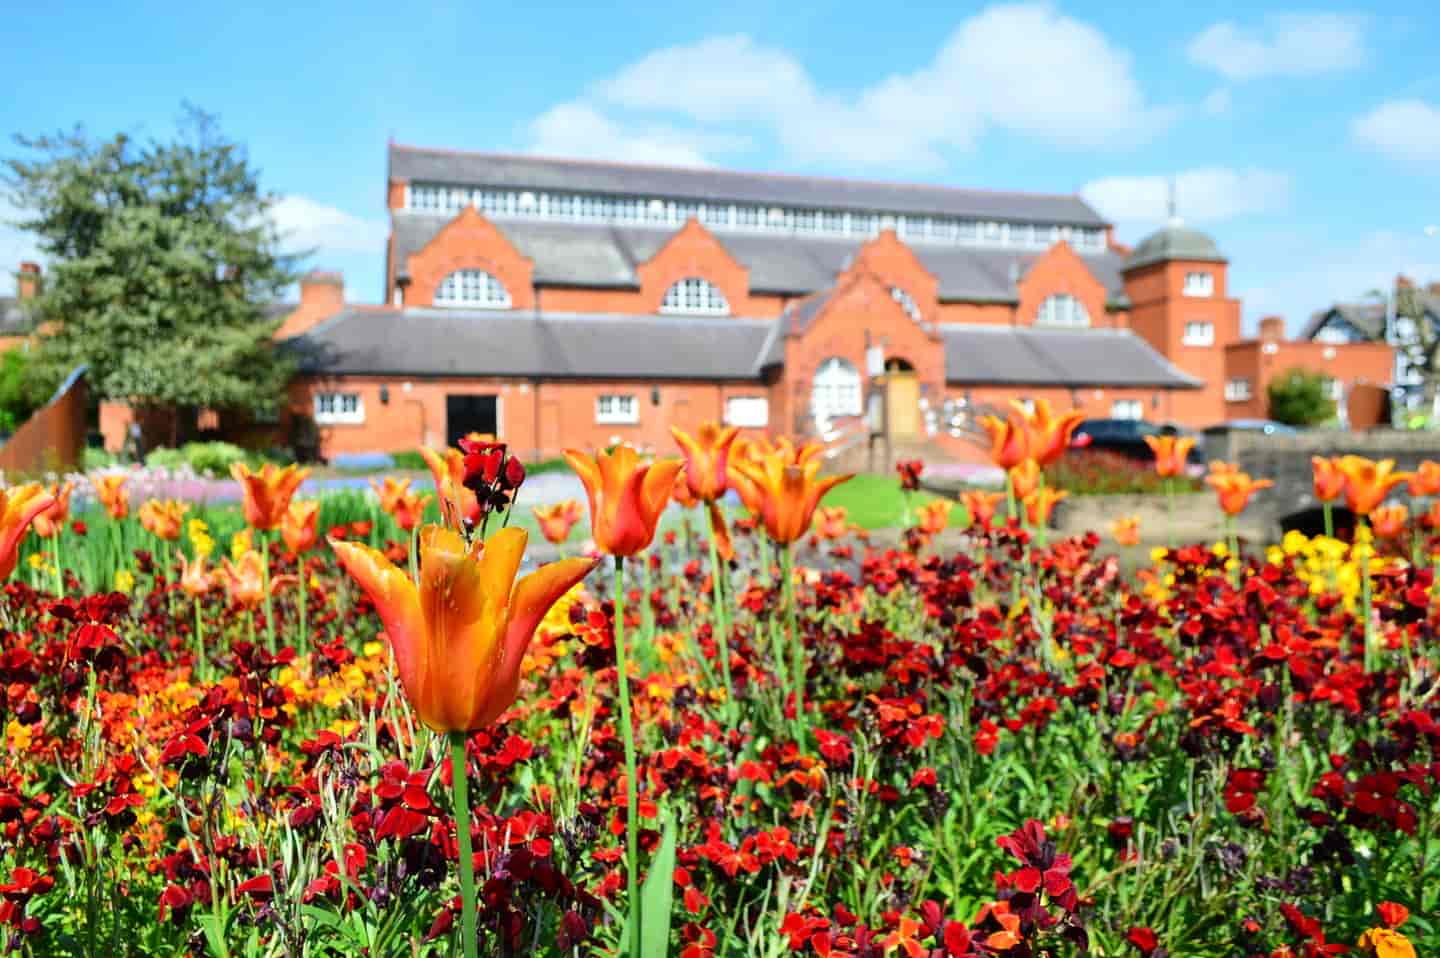 Student Accommodation in Loughborough - Orange flowers and Charnwood Museum